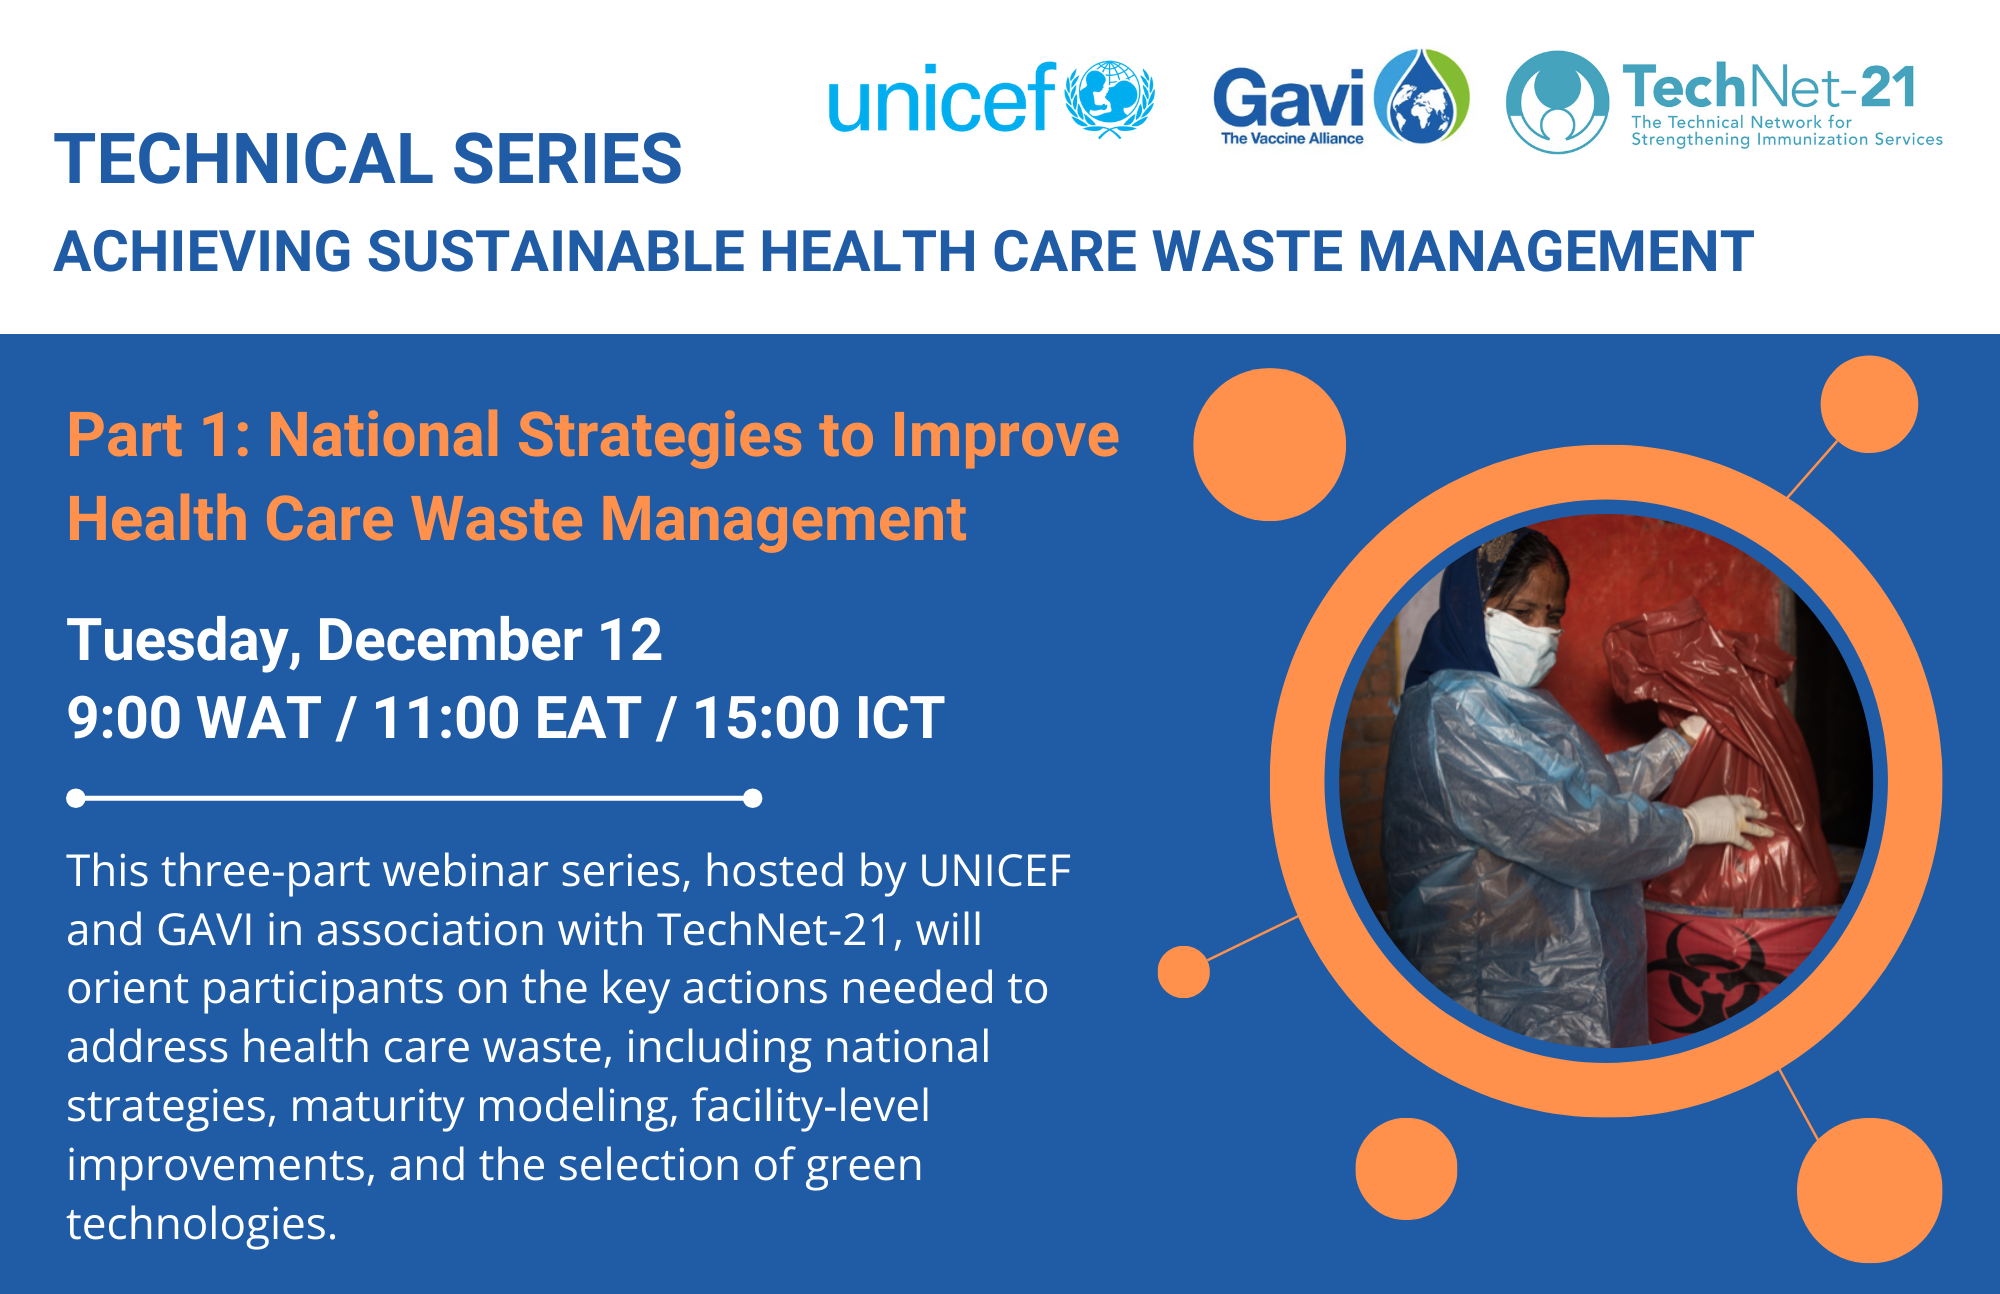 Technical webinar series on health care waste management